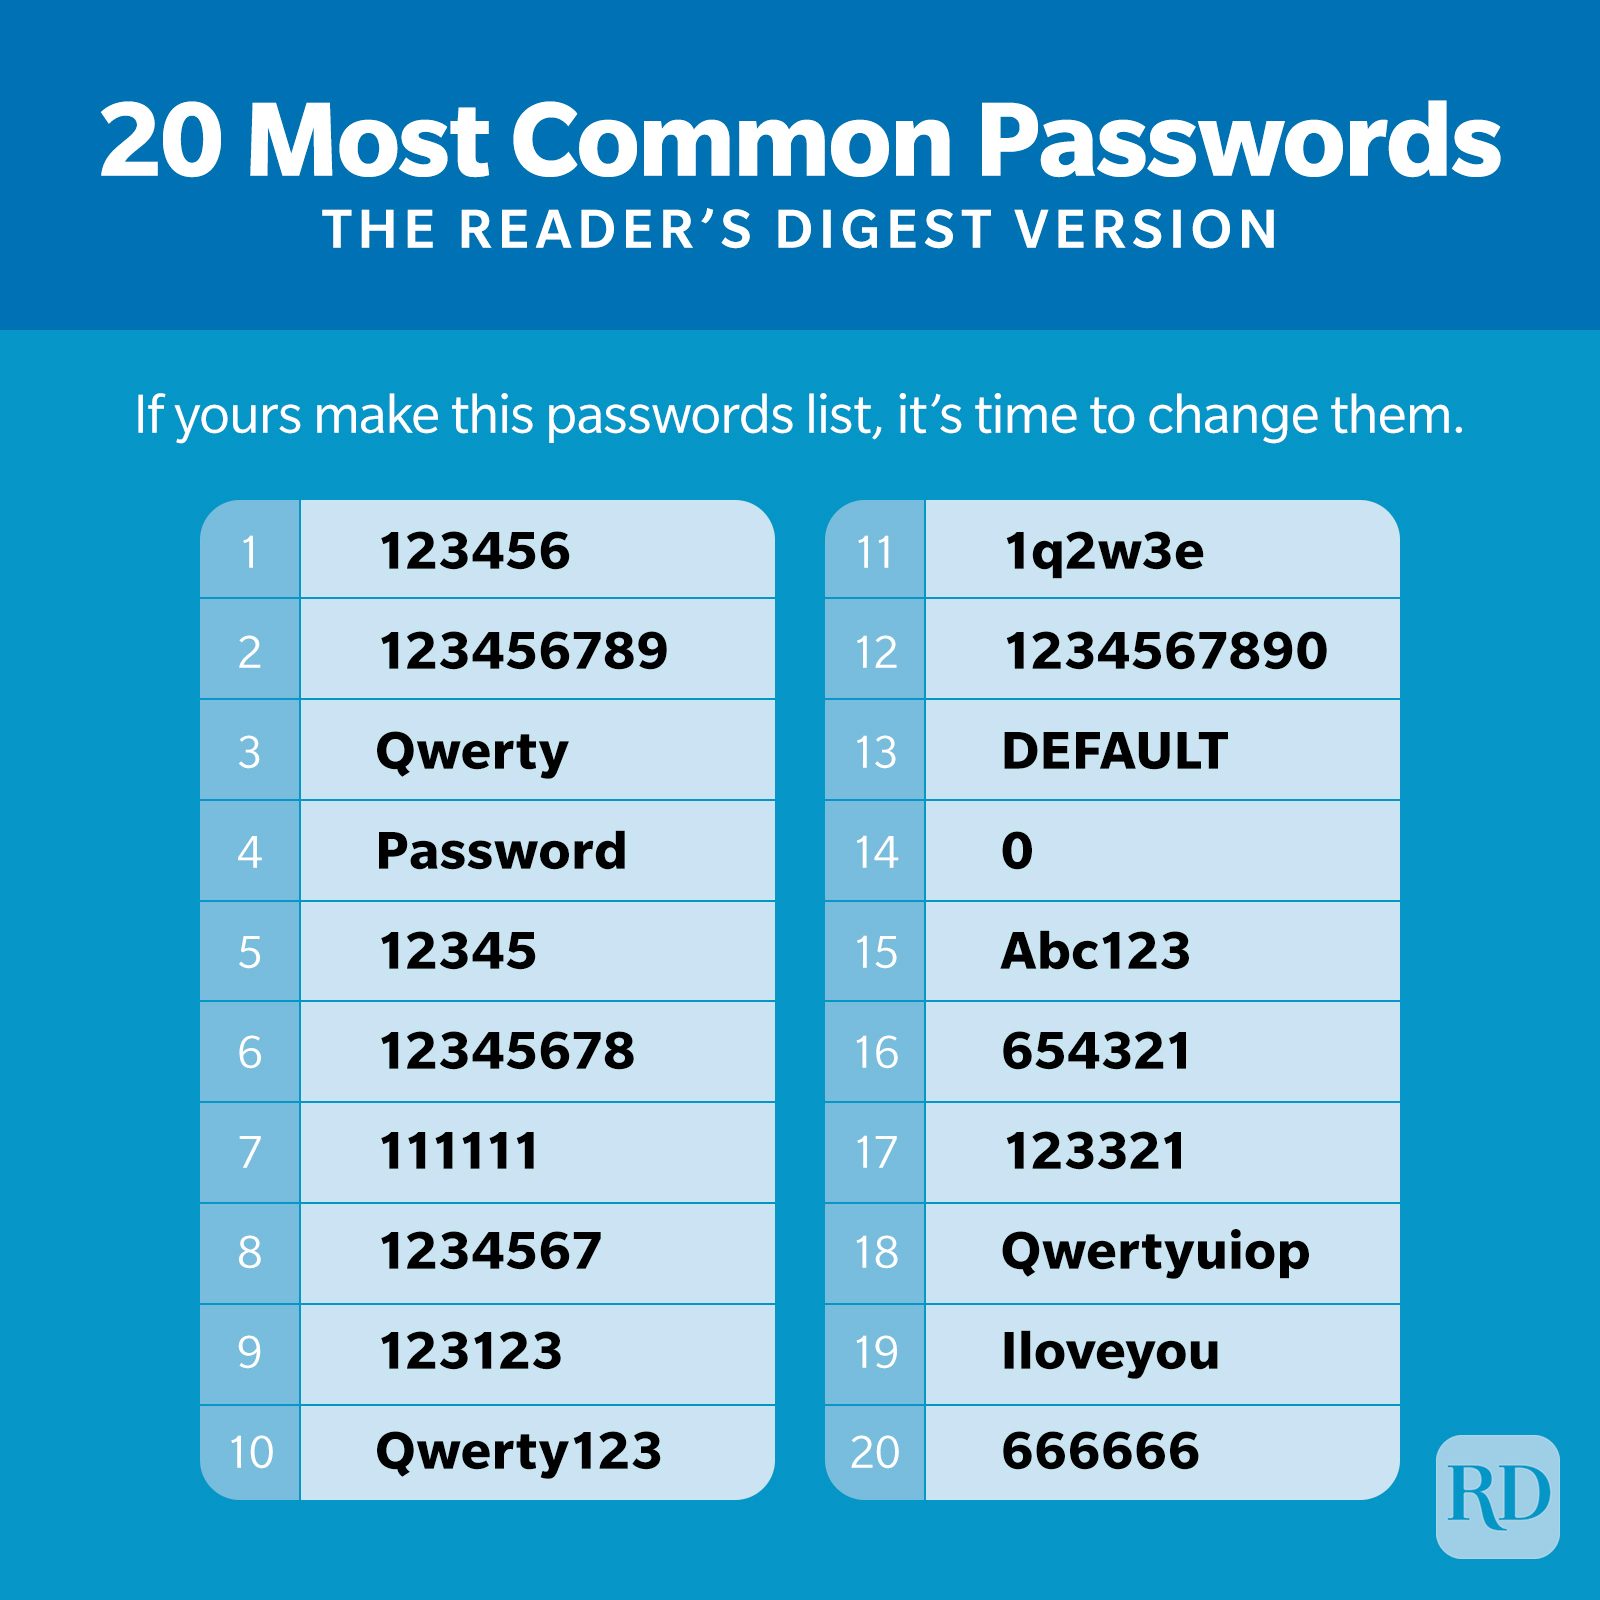 PIN vs Password: What's the Difference? Which Is More Secure?